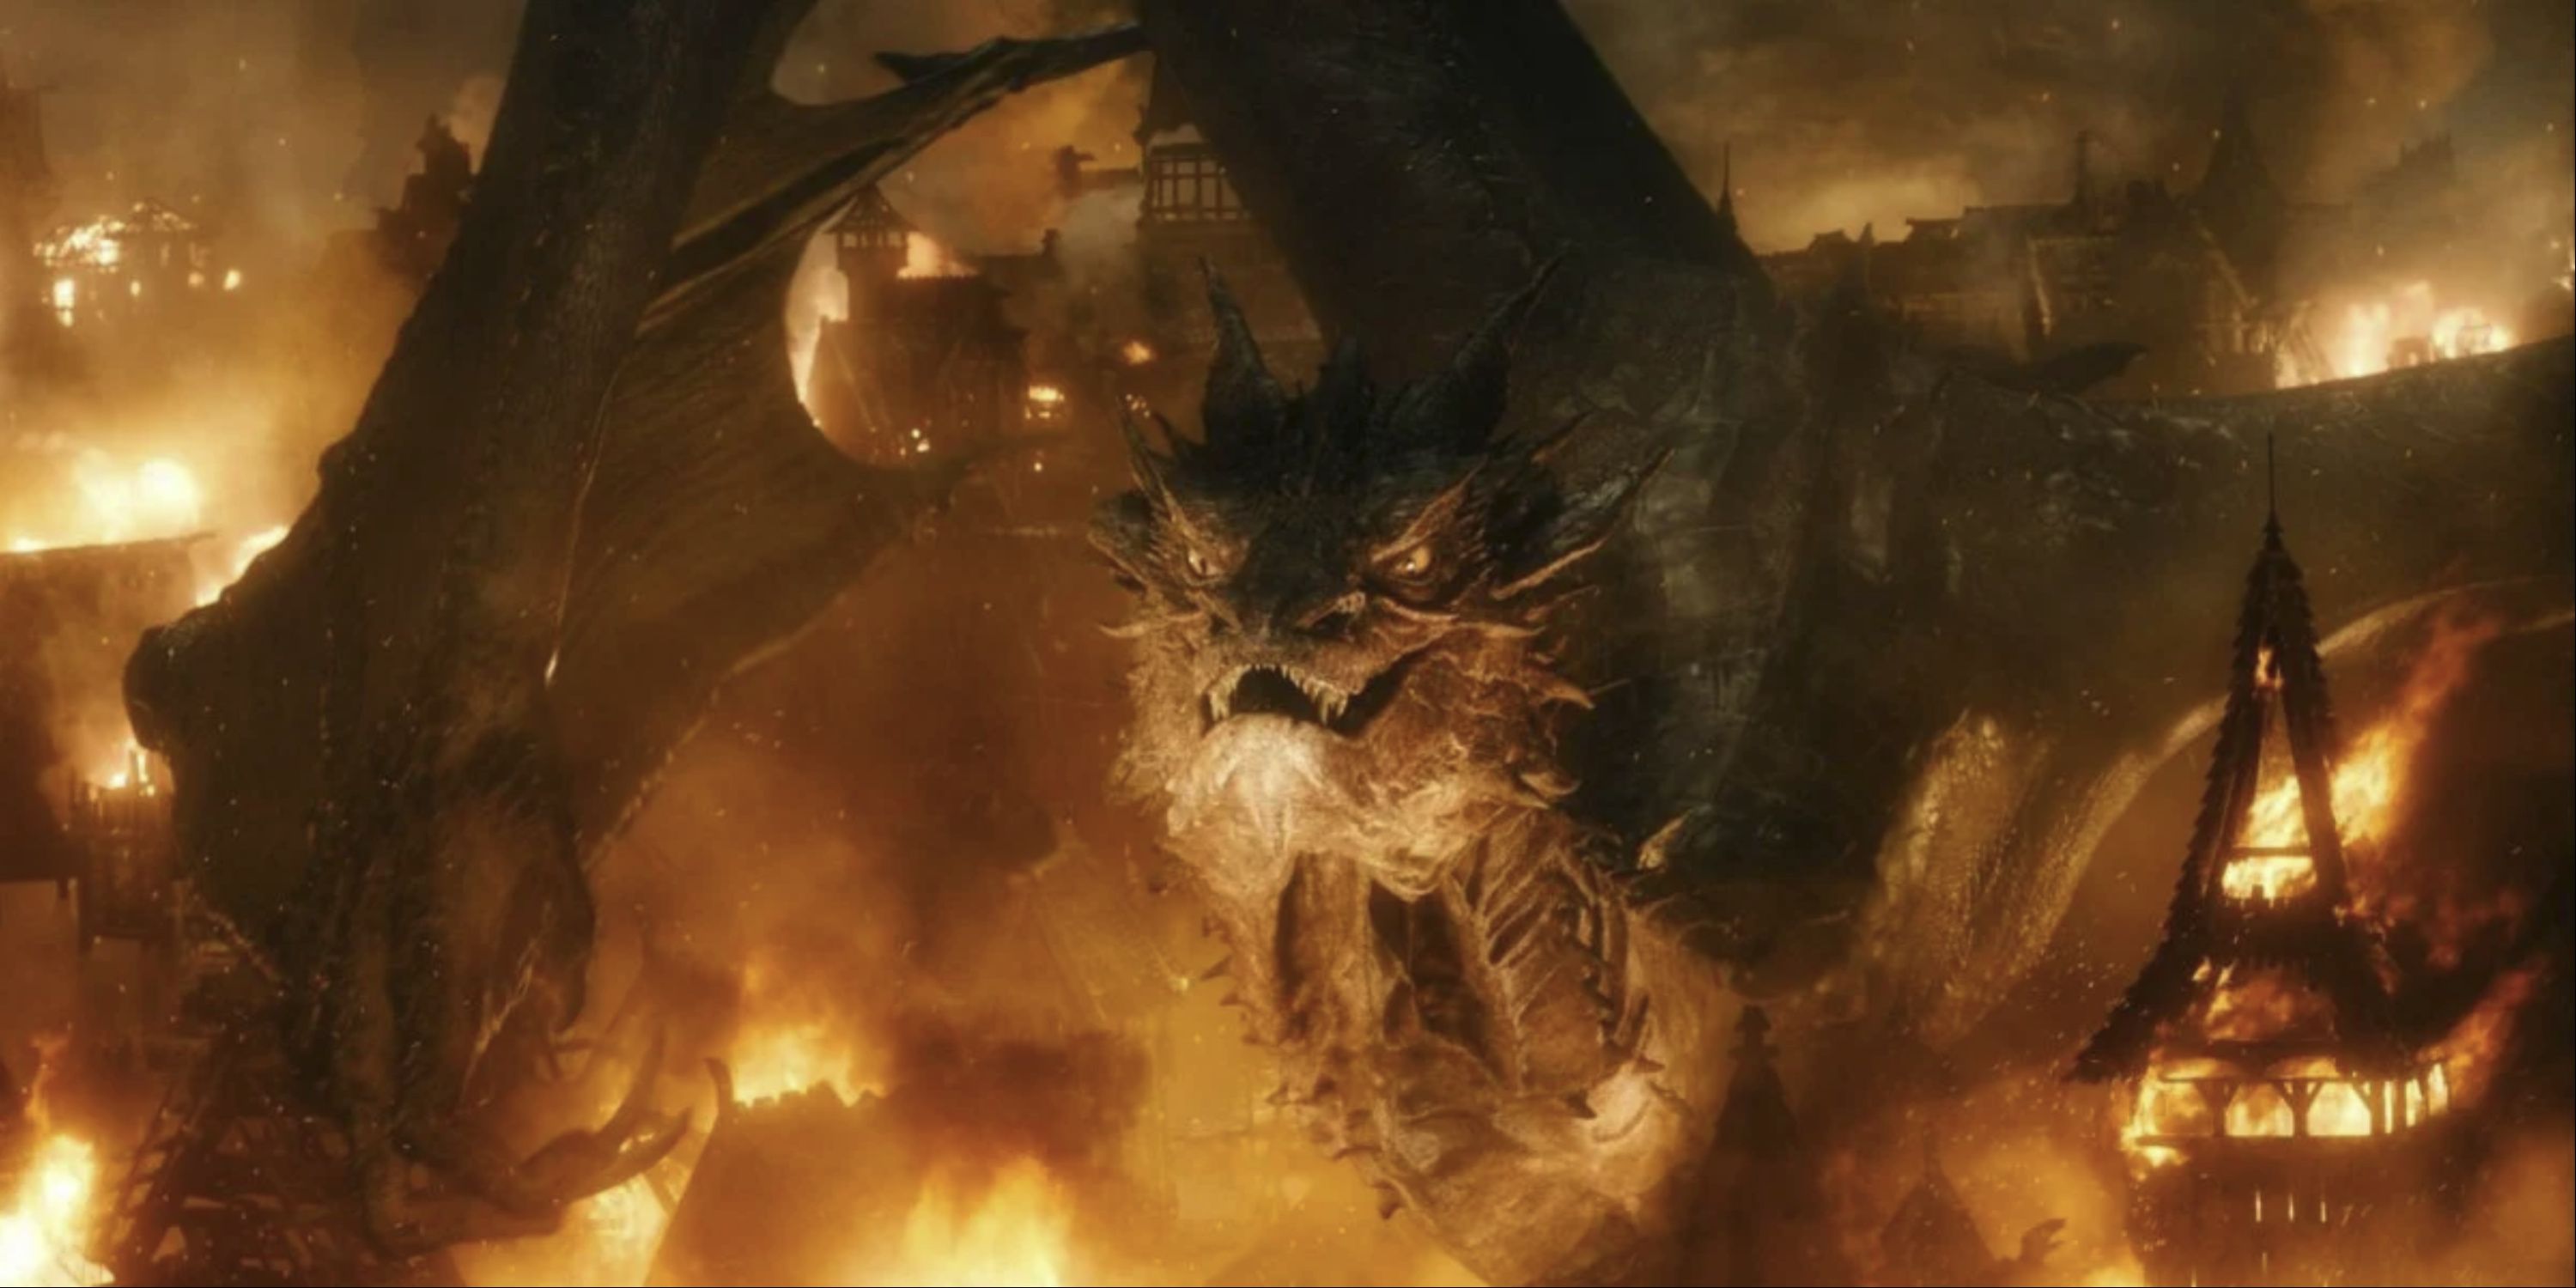 Smaug destroying a town in The Hobbit